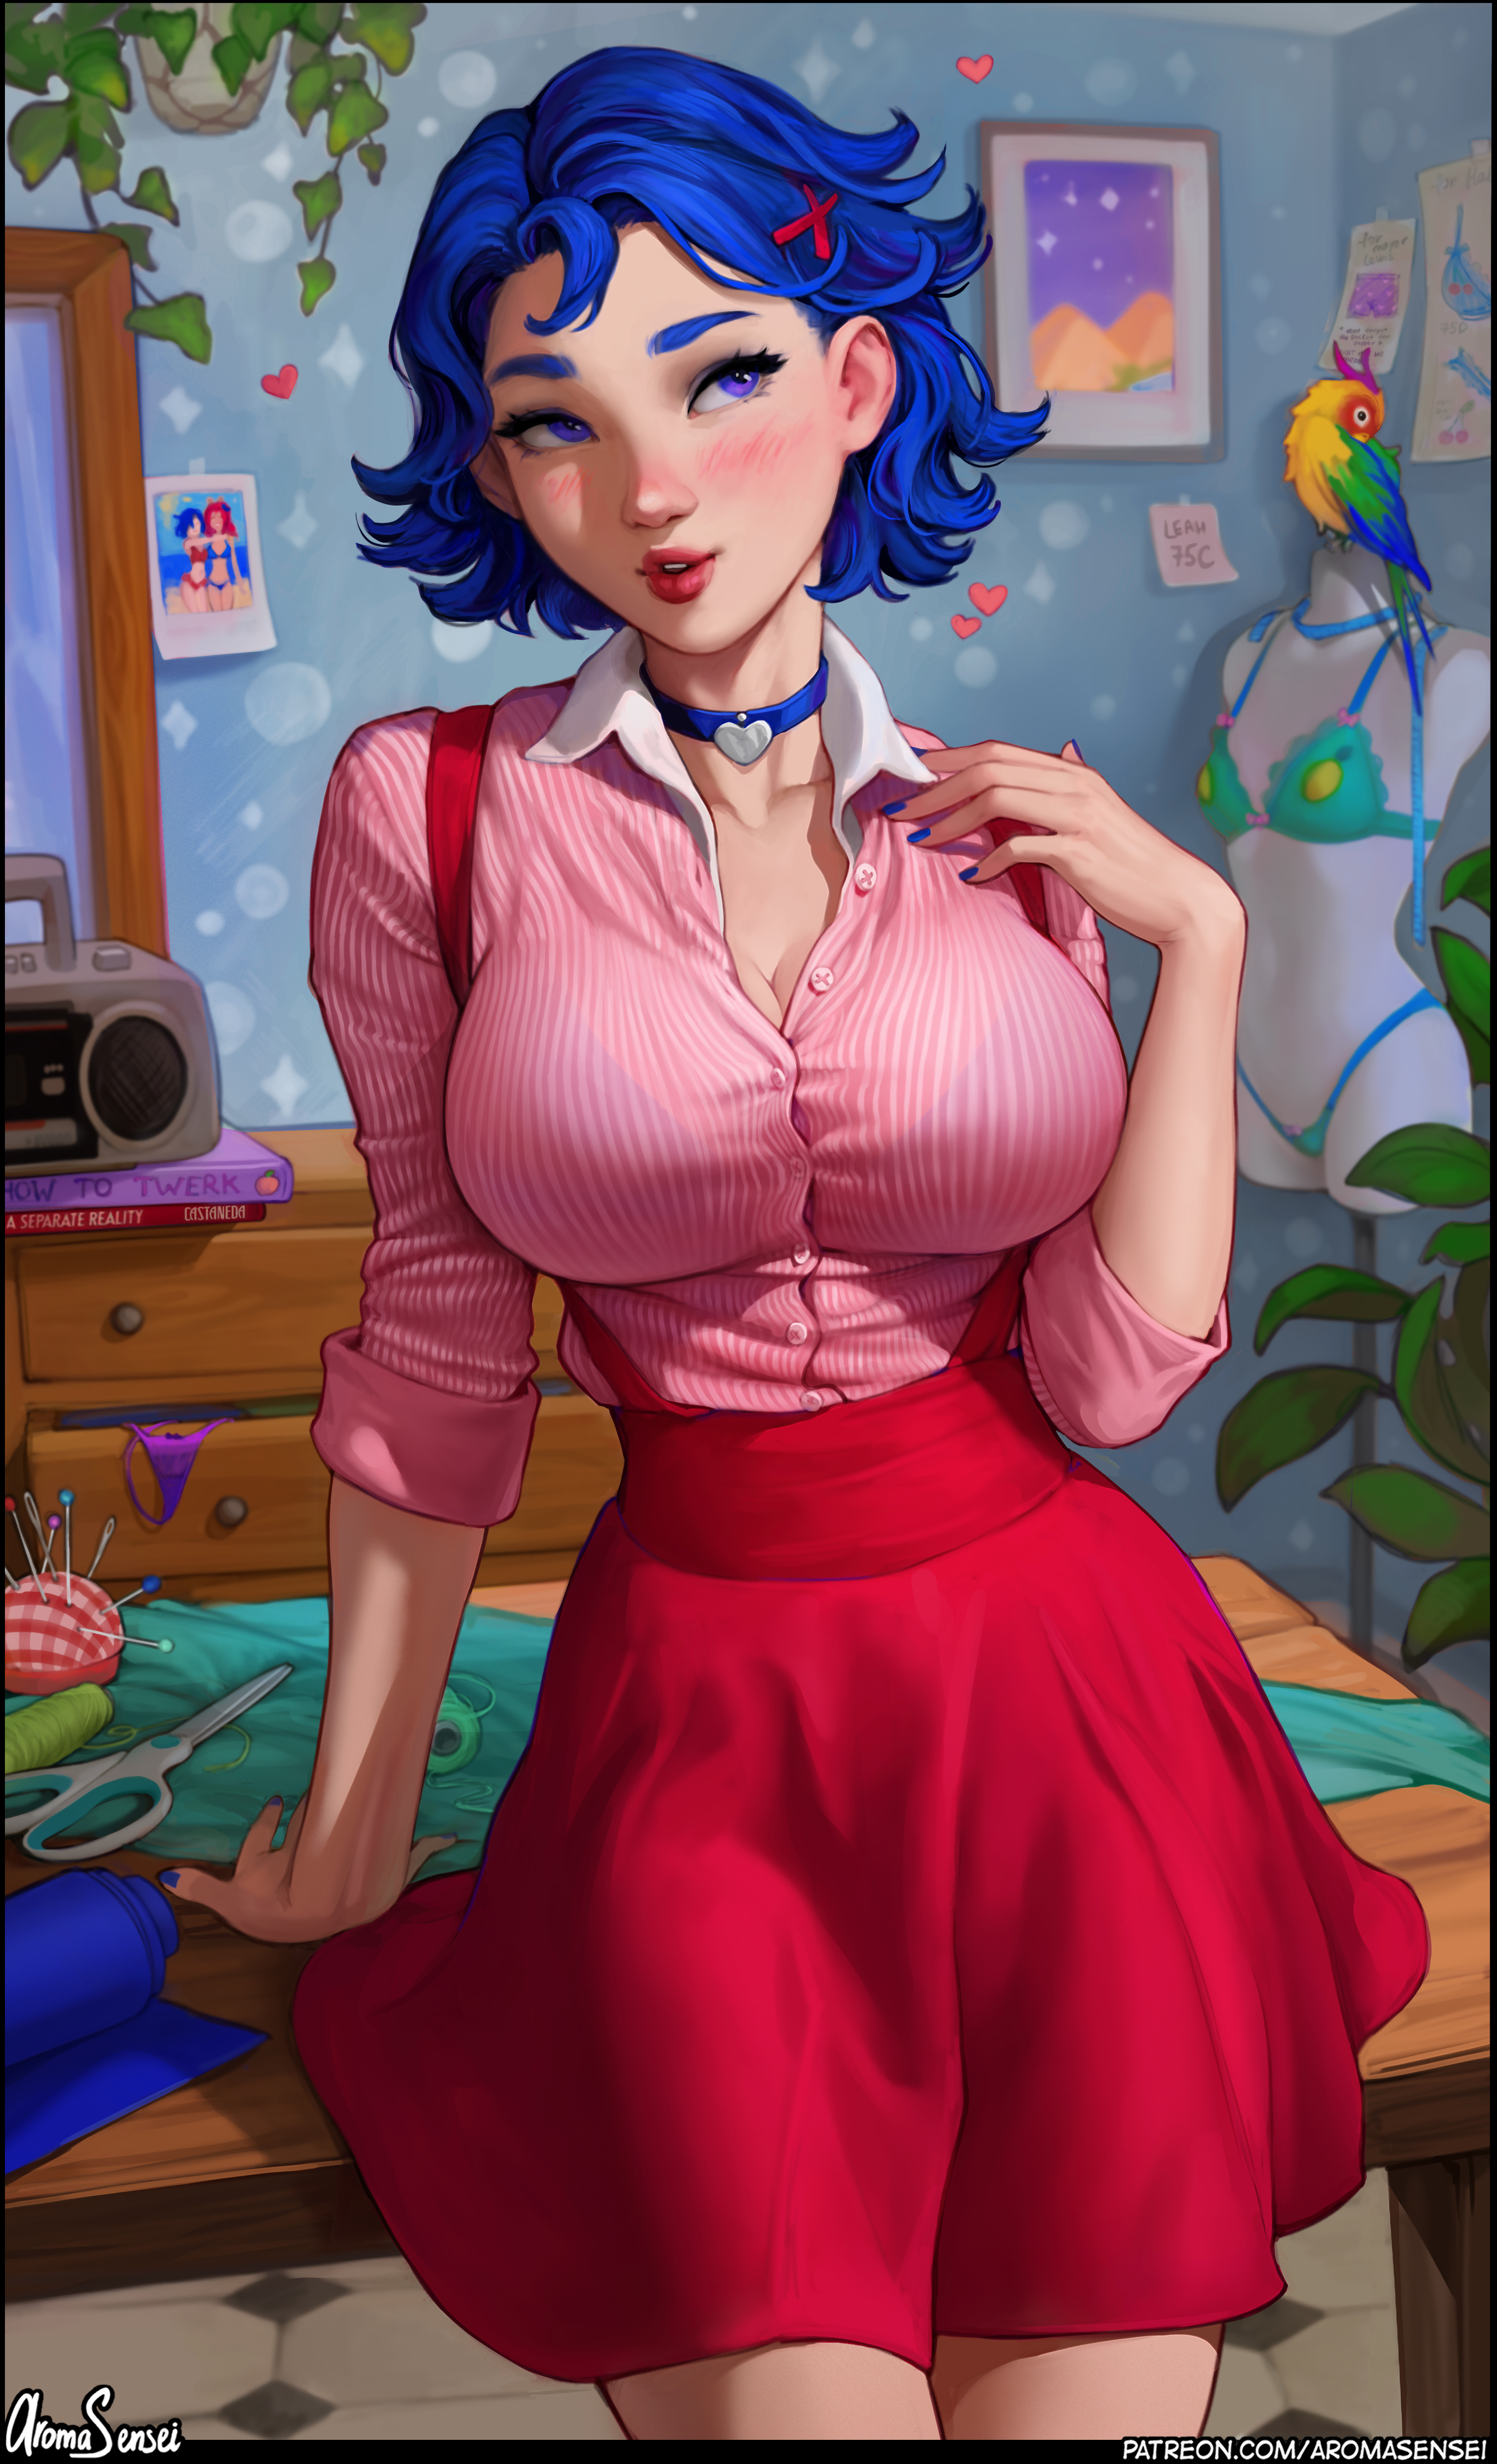 General 3038x5000 Emily (Stardew Valley) Stardew Valley video games video game girls video game characters artwork drawing fan art Aroma Sensei portrait display choker watermarked big boobs looking away short hair birds animals standing leaves scissors signature heart blushing